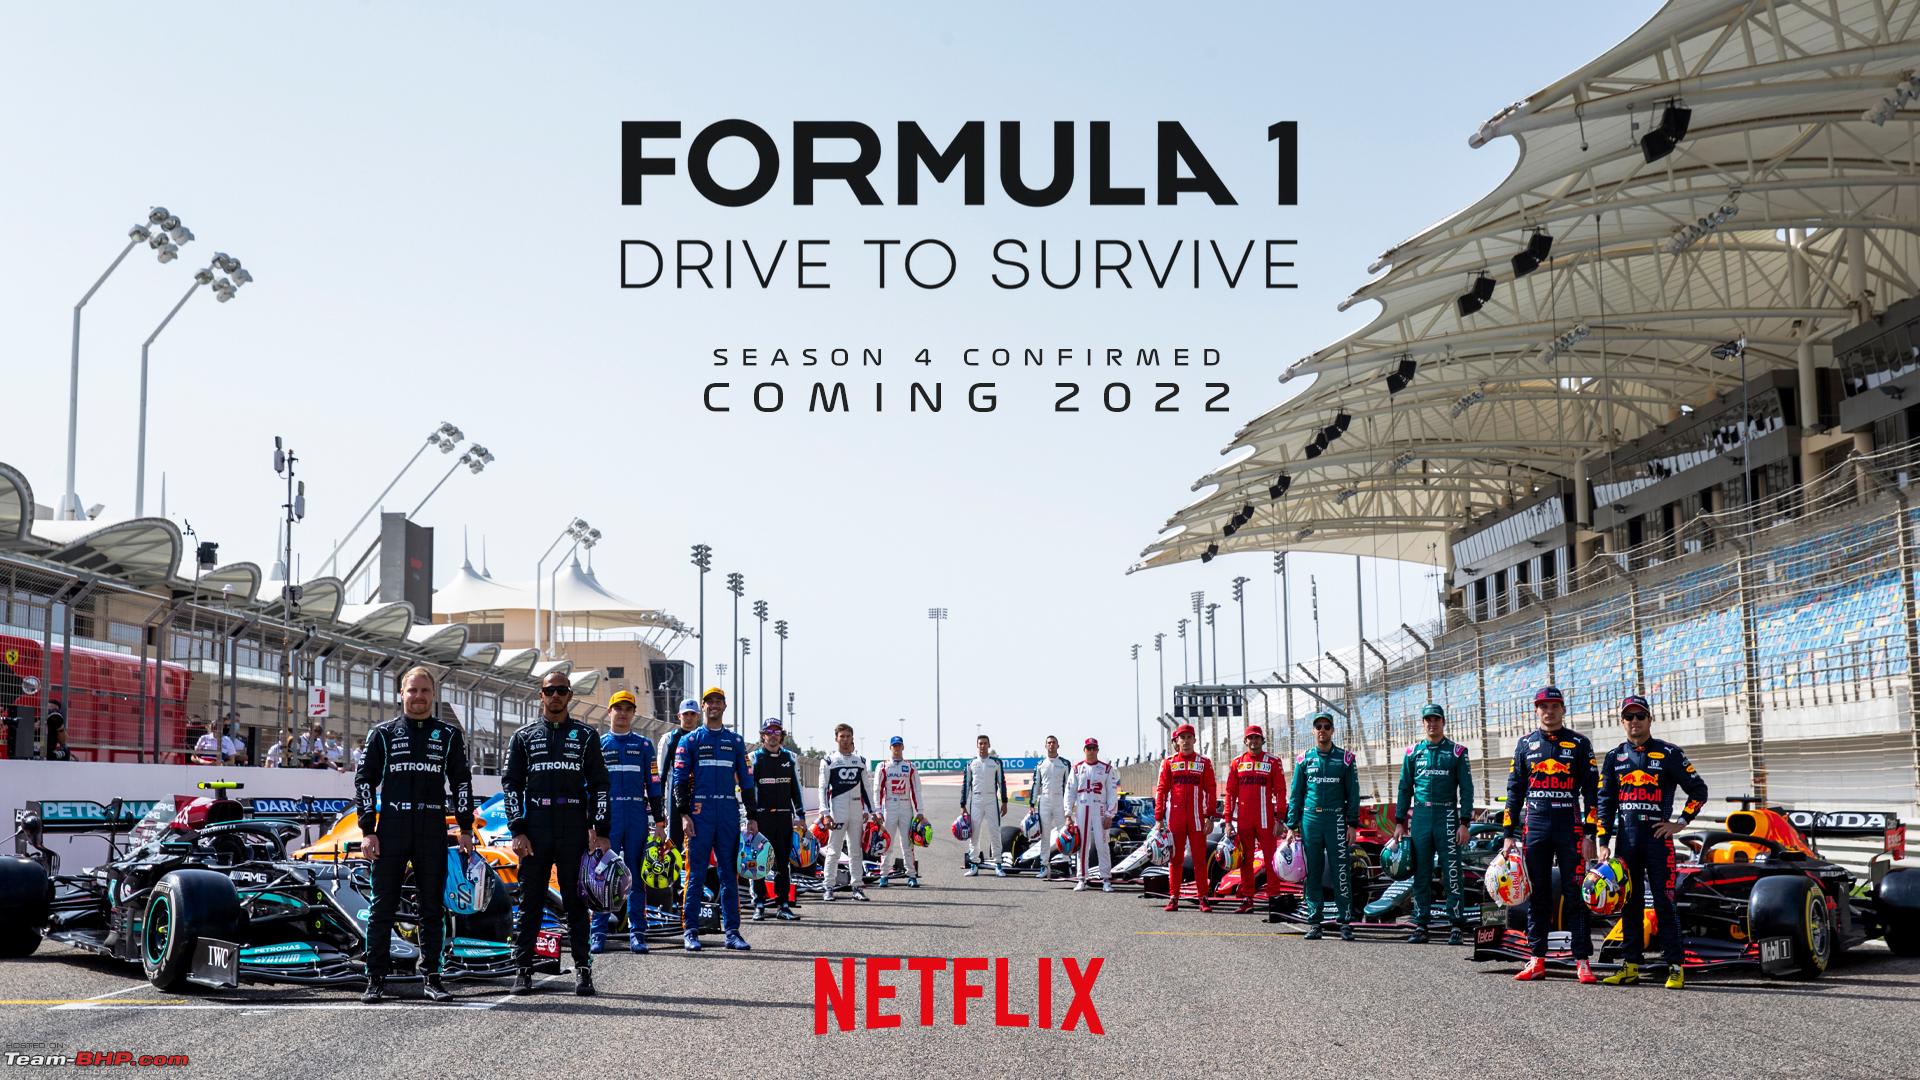 Drive to survive Netflixs new F1 documentary series - Page 2